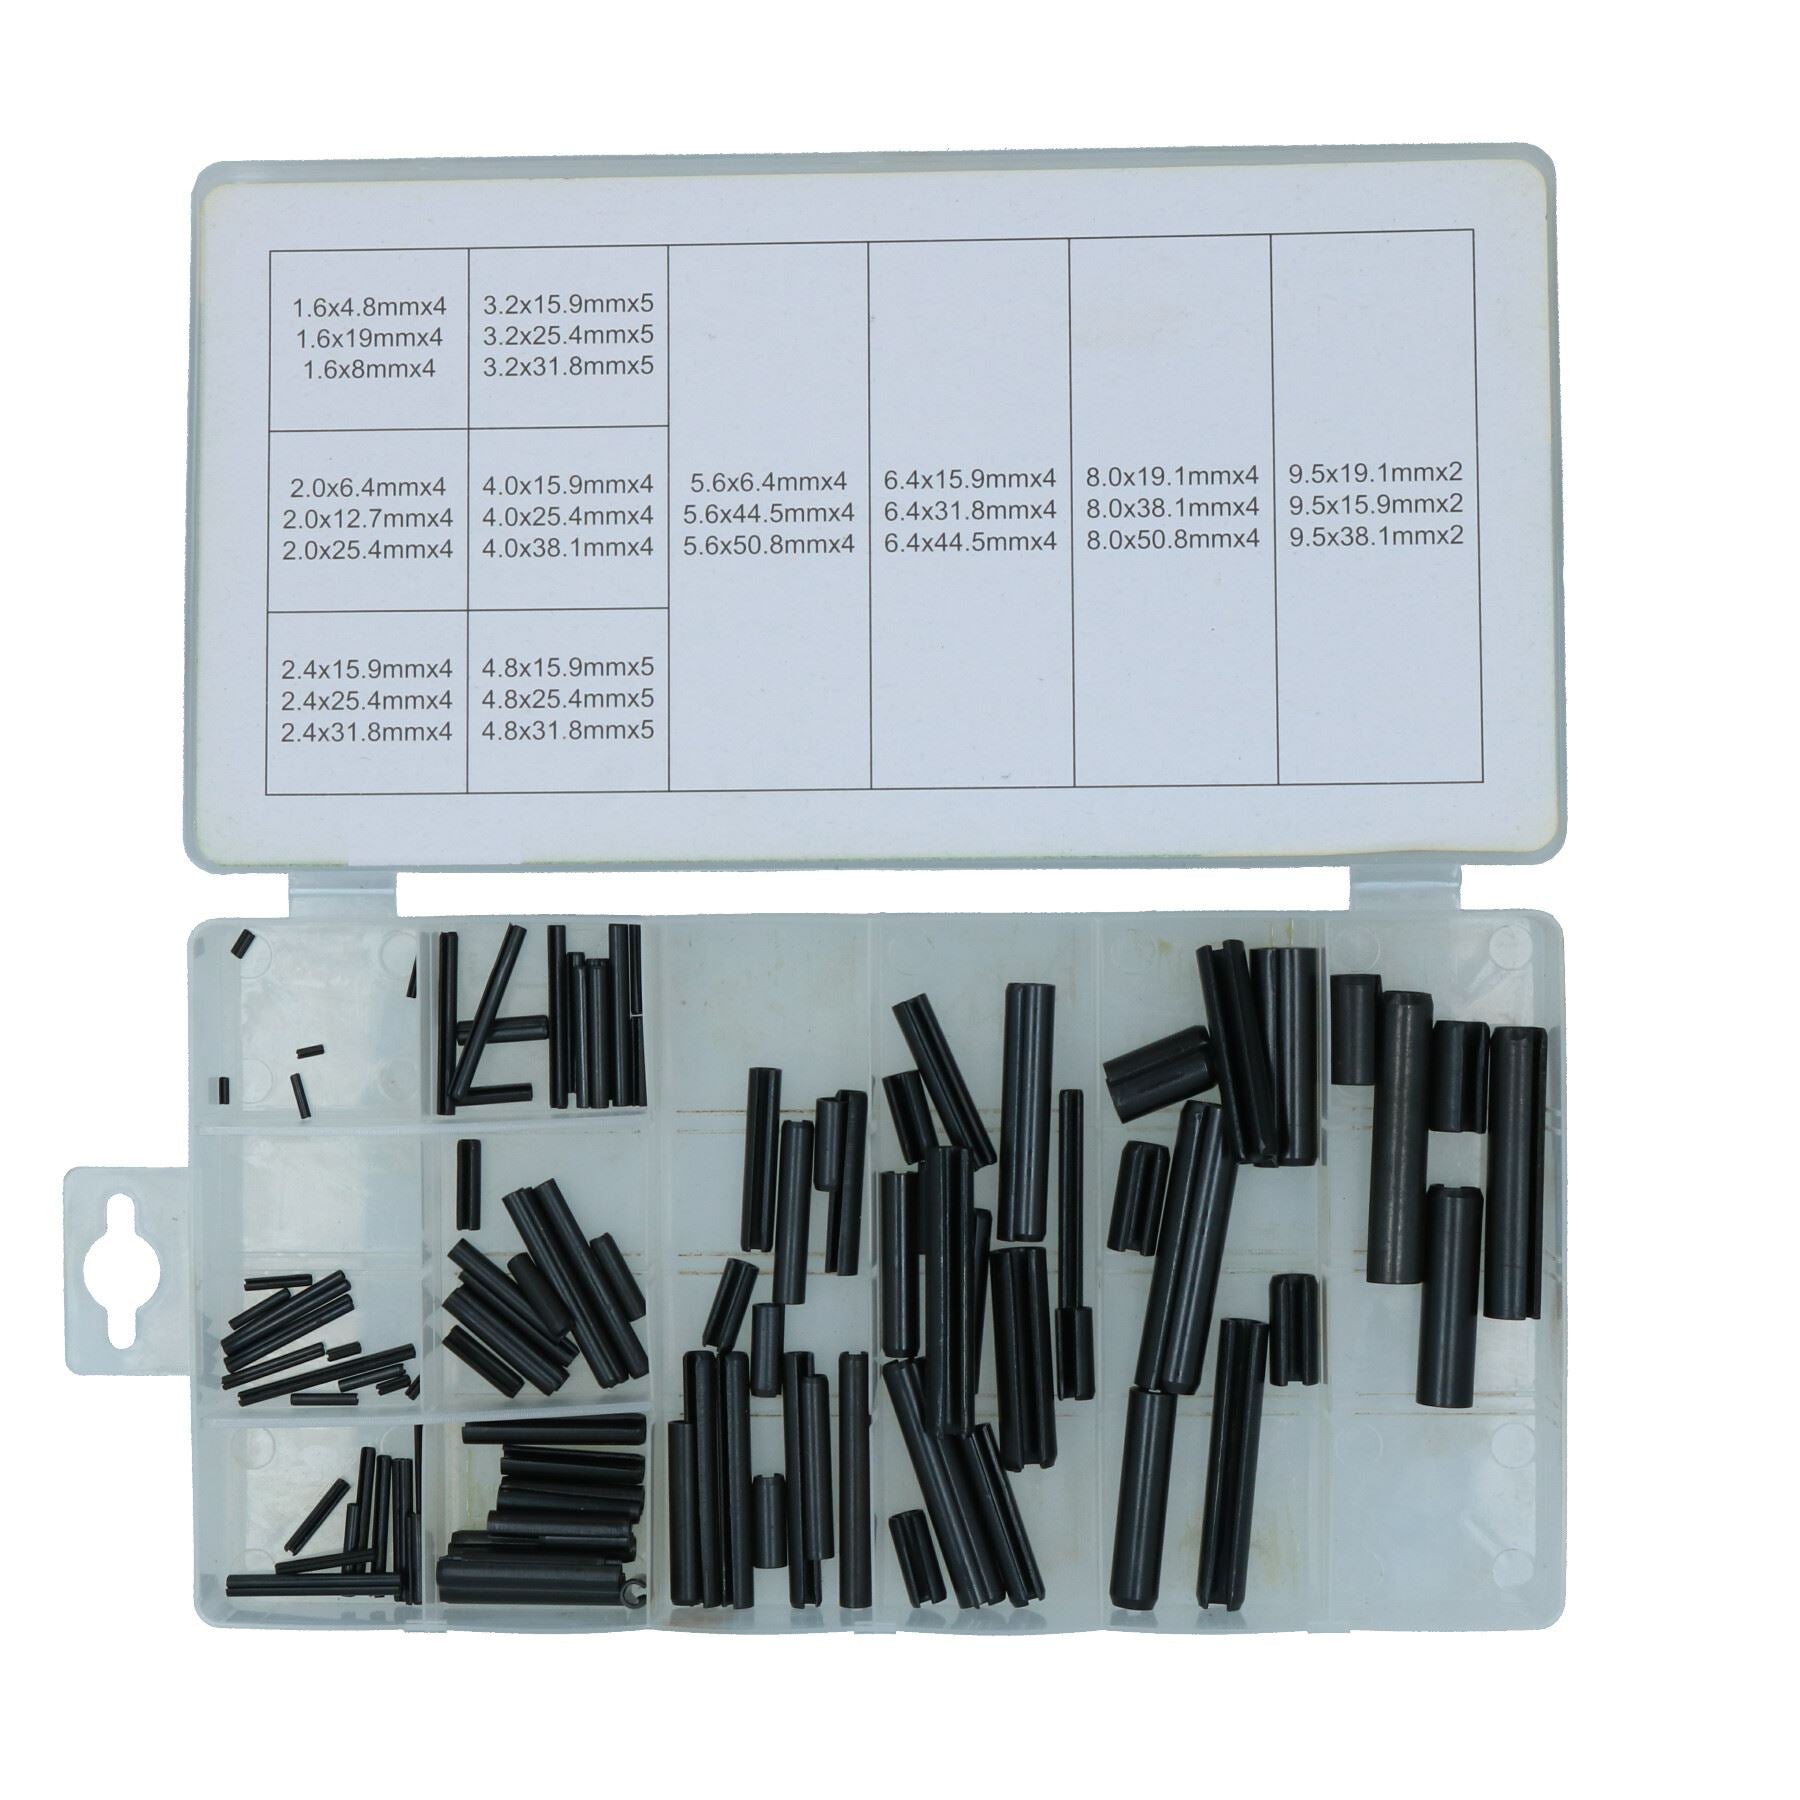 Roll Pin Assortment Set Pins Spring Tension 1.6mm – 9.5mm 15 Sizes 120pc Kit